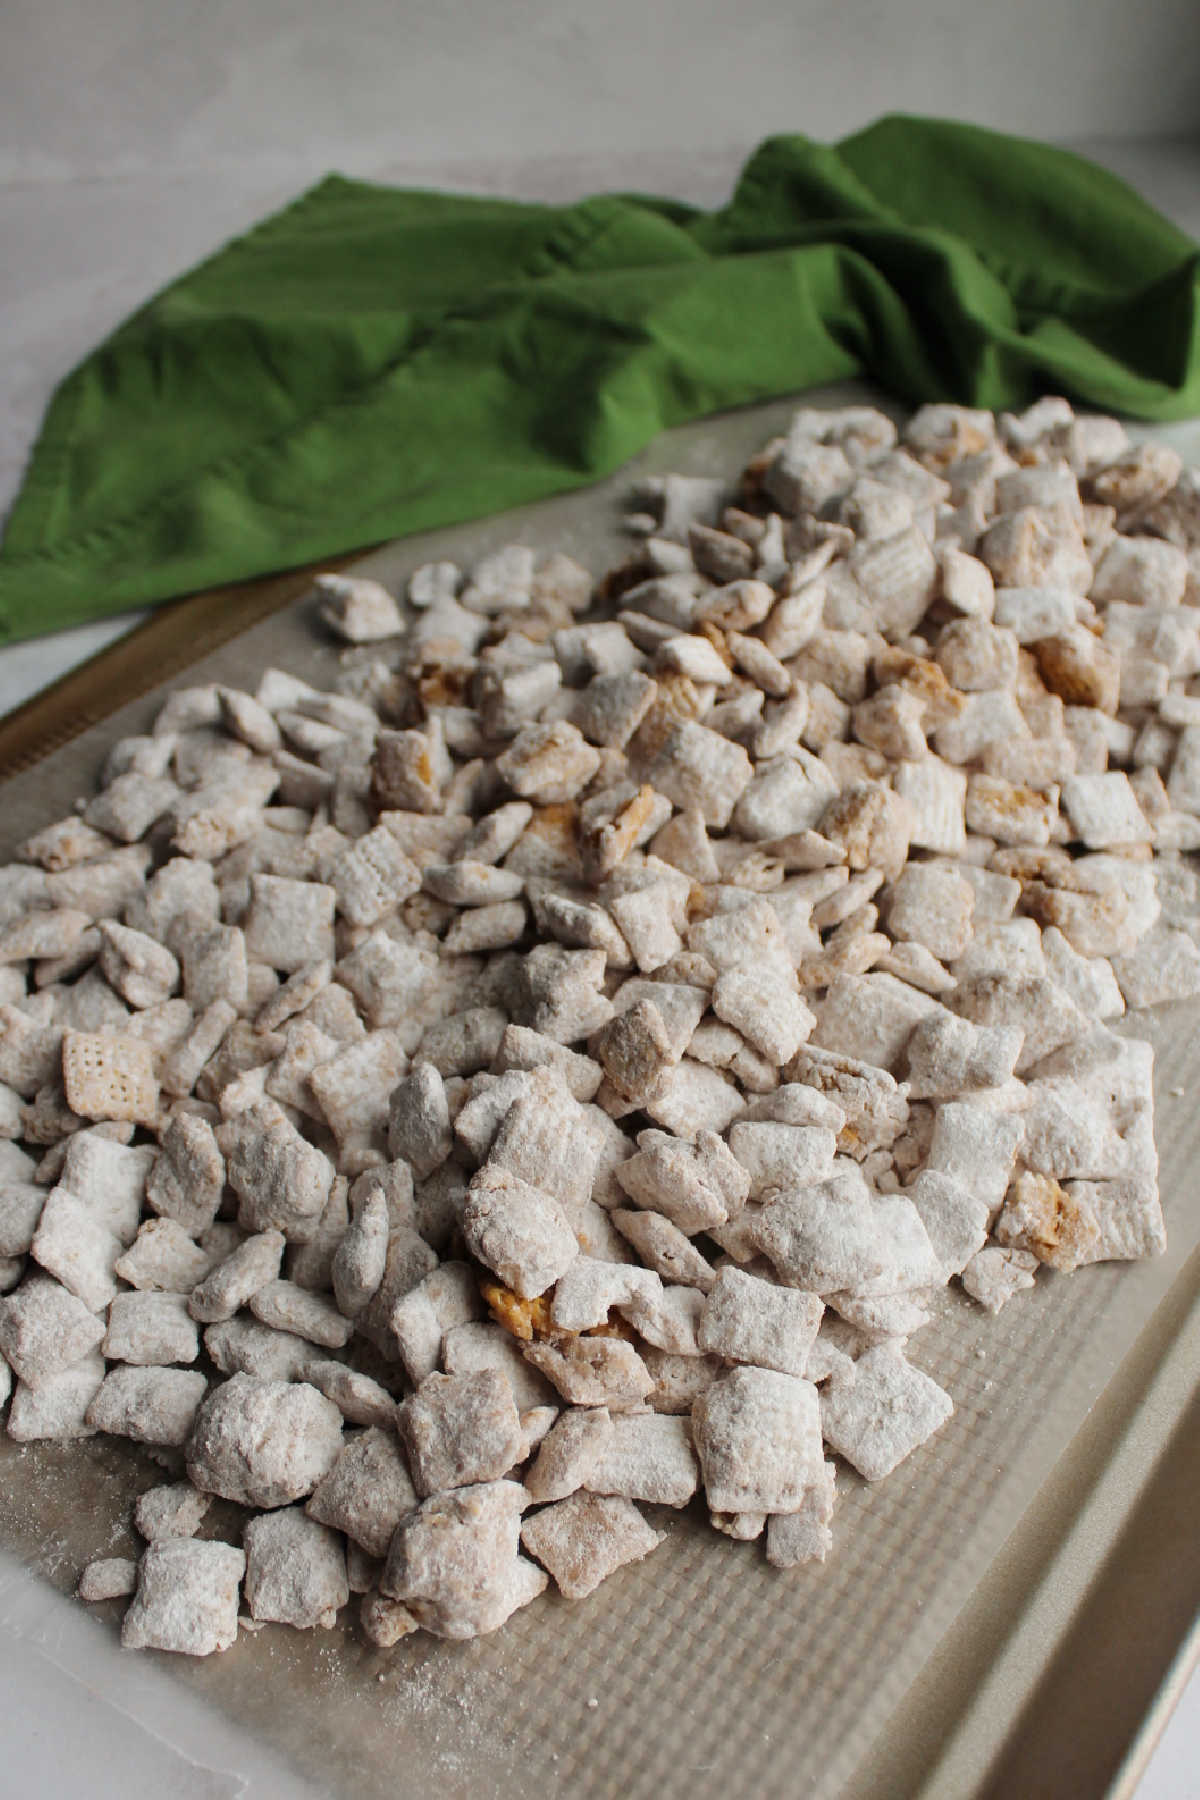 Powdered sugar coated maple cinnamon muddy buddies spread out on wax paper to set.